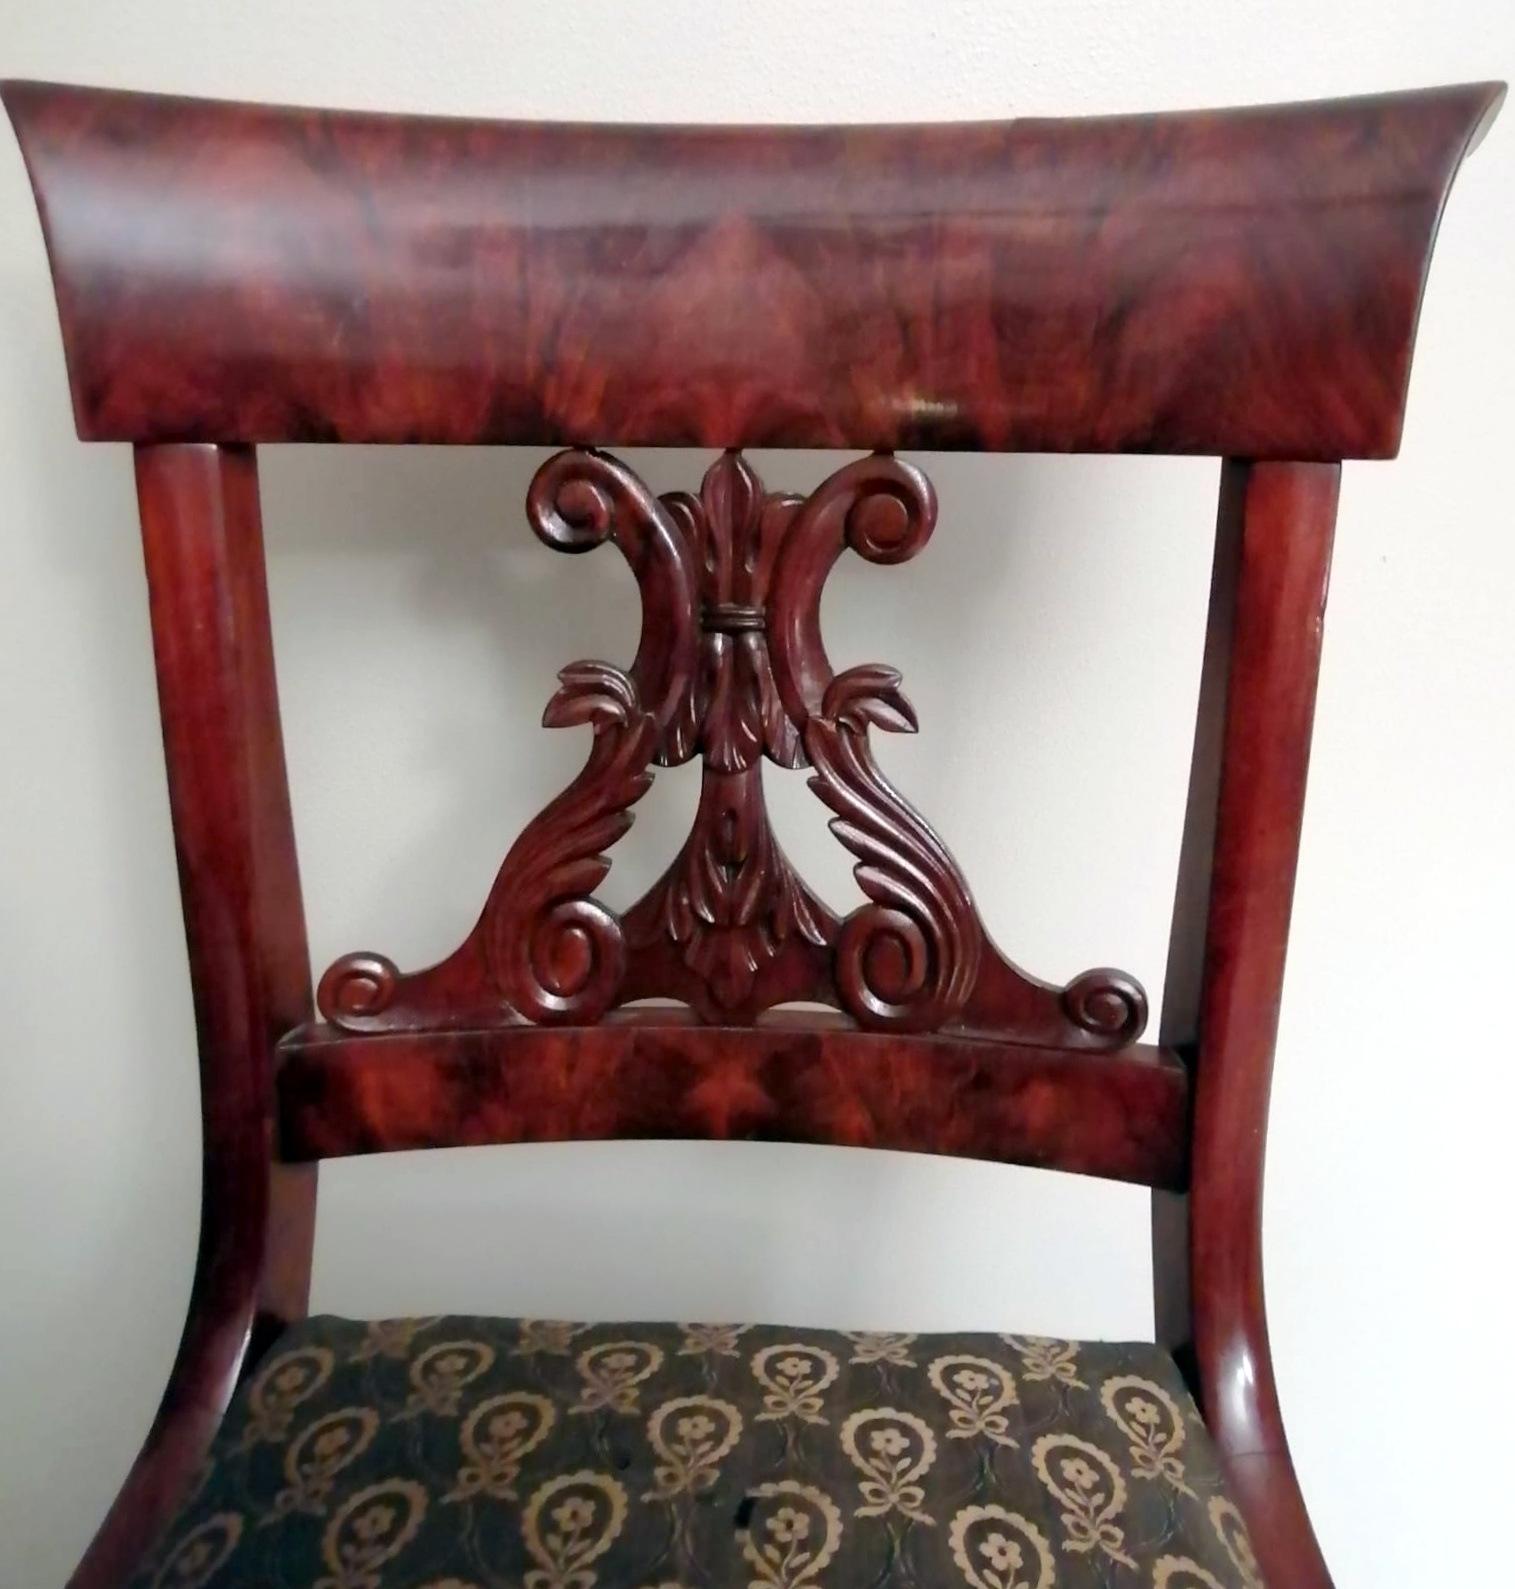 Biedermeier Style Danish Chair in Wood and Fabric In Good Condition For Sale In Prato, Tuscany